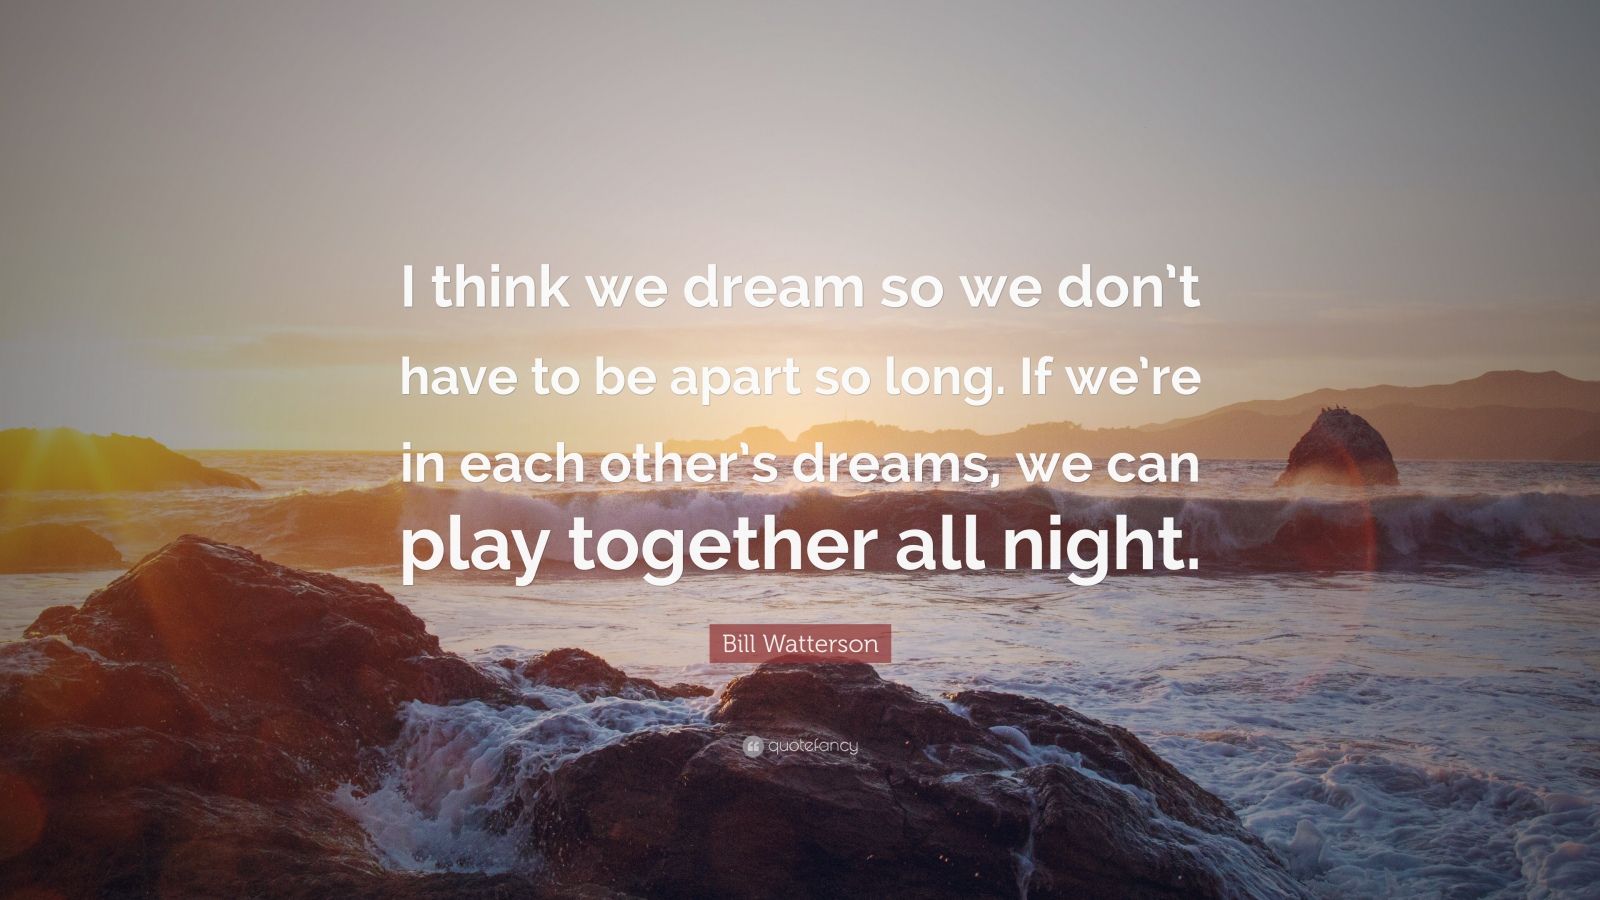 Bill Watterson Quote: "I think we dream so we don't have ...